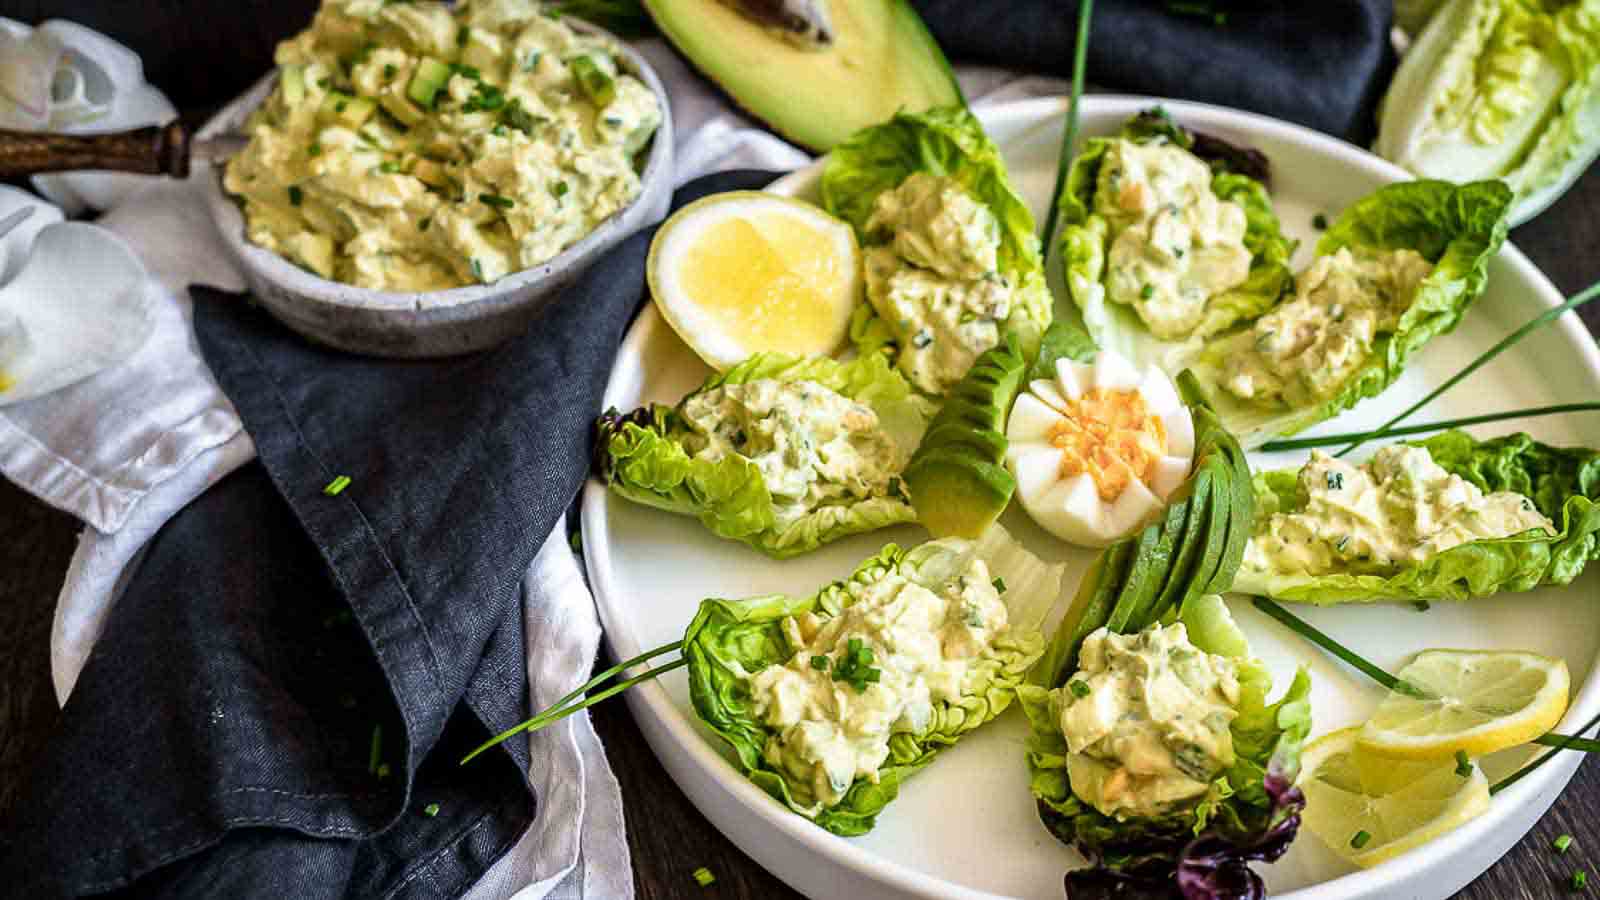 A plate with lettuce wraps and avocado on it.